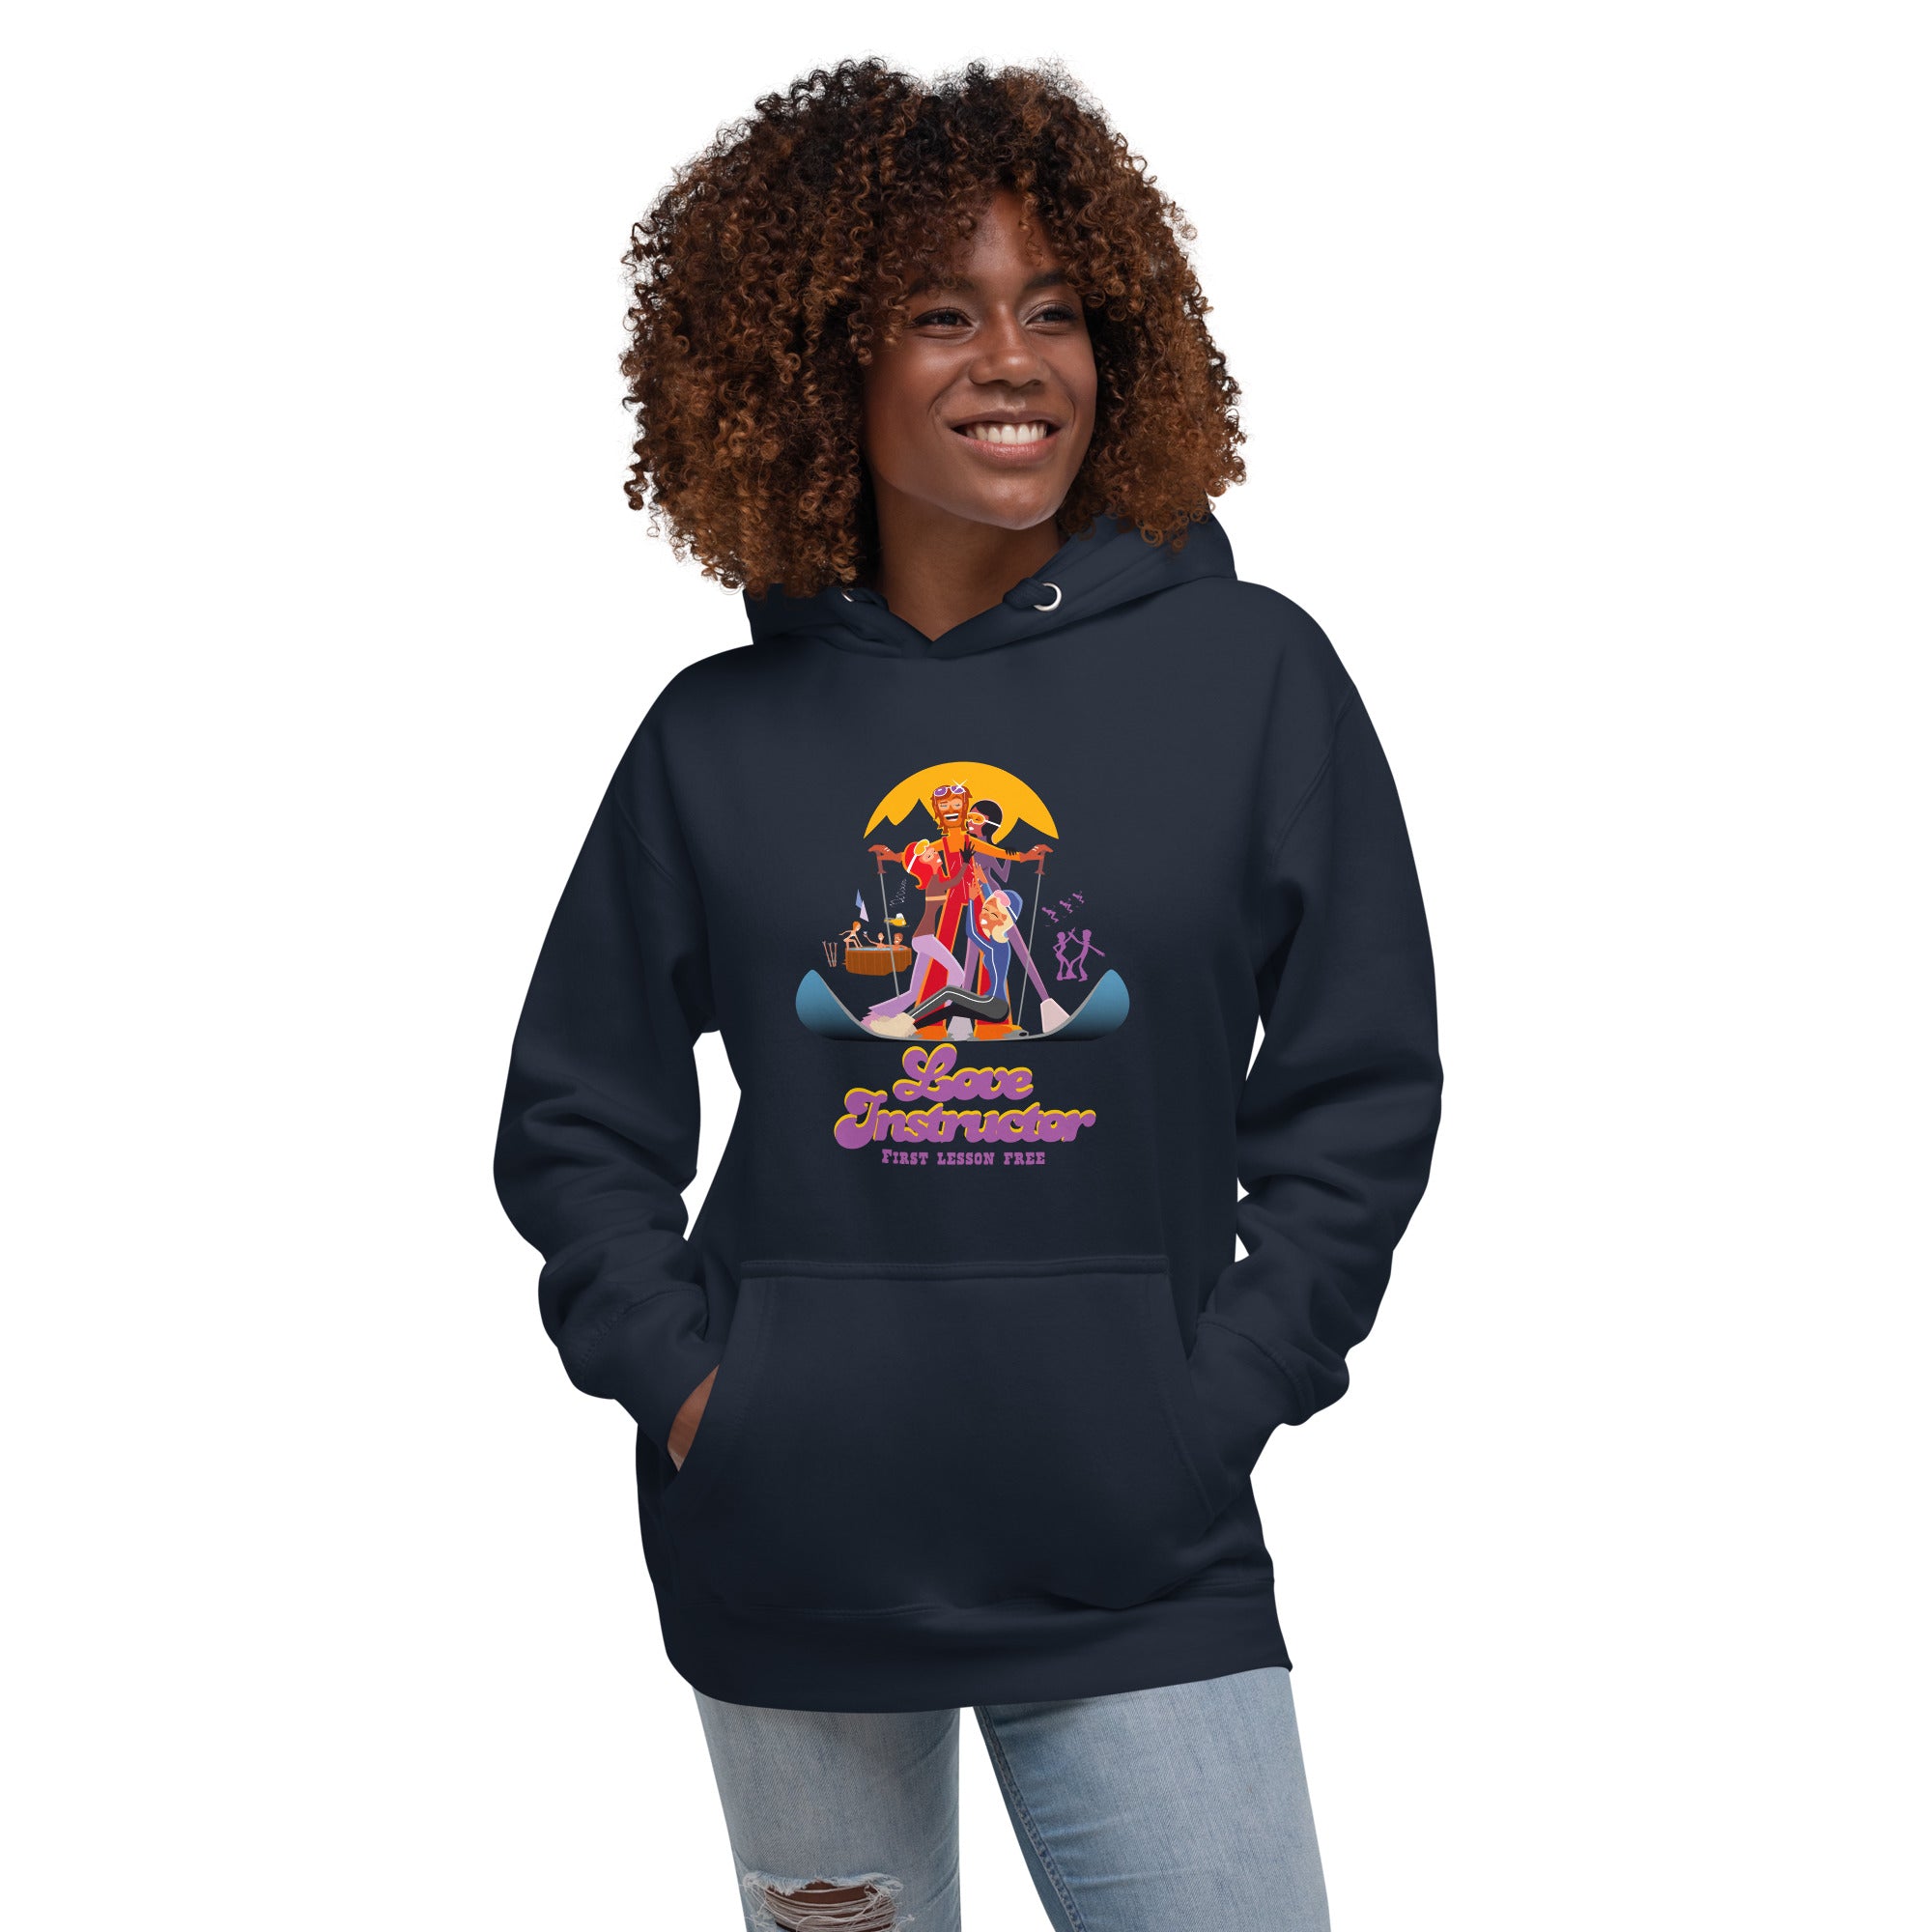 Unisex Cotton Hoodie Love Instructor First Lesson free